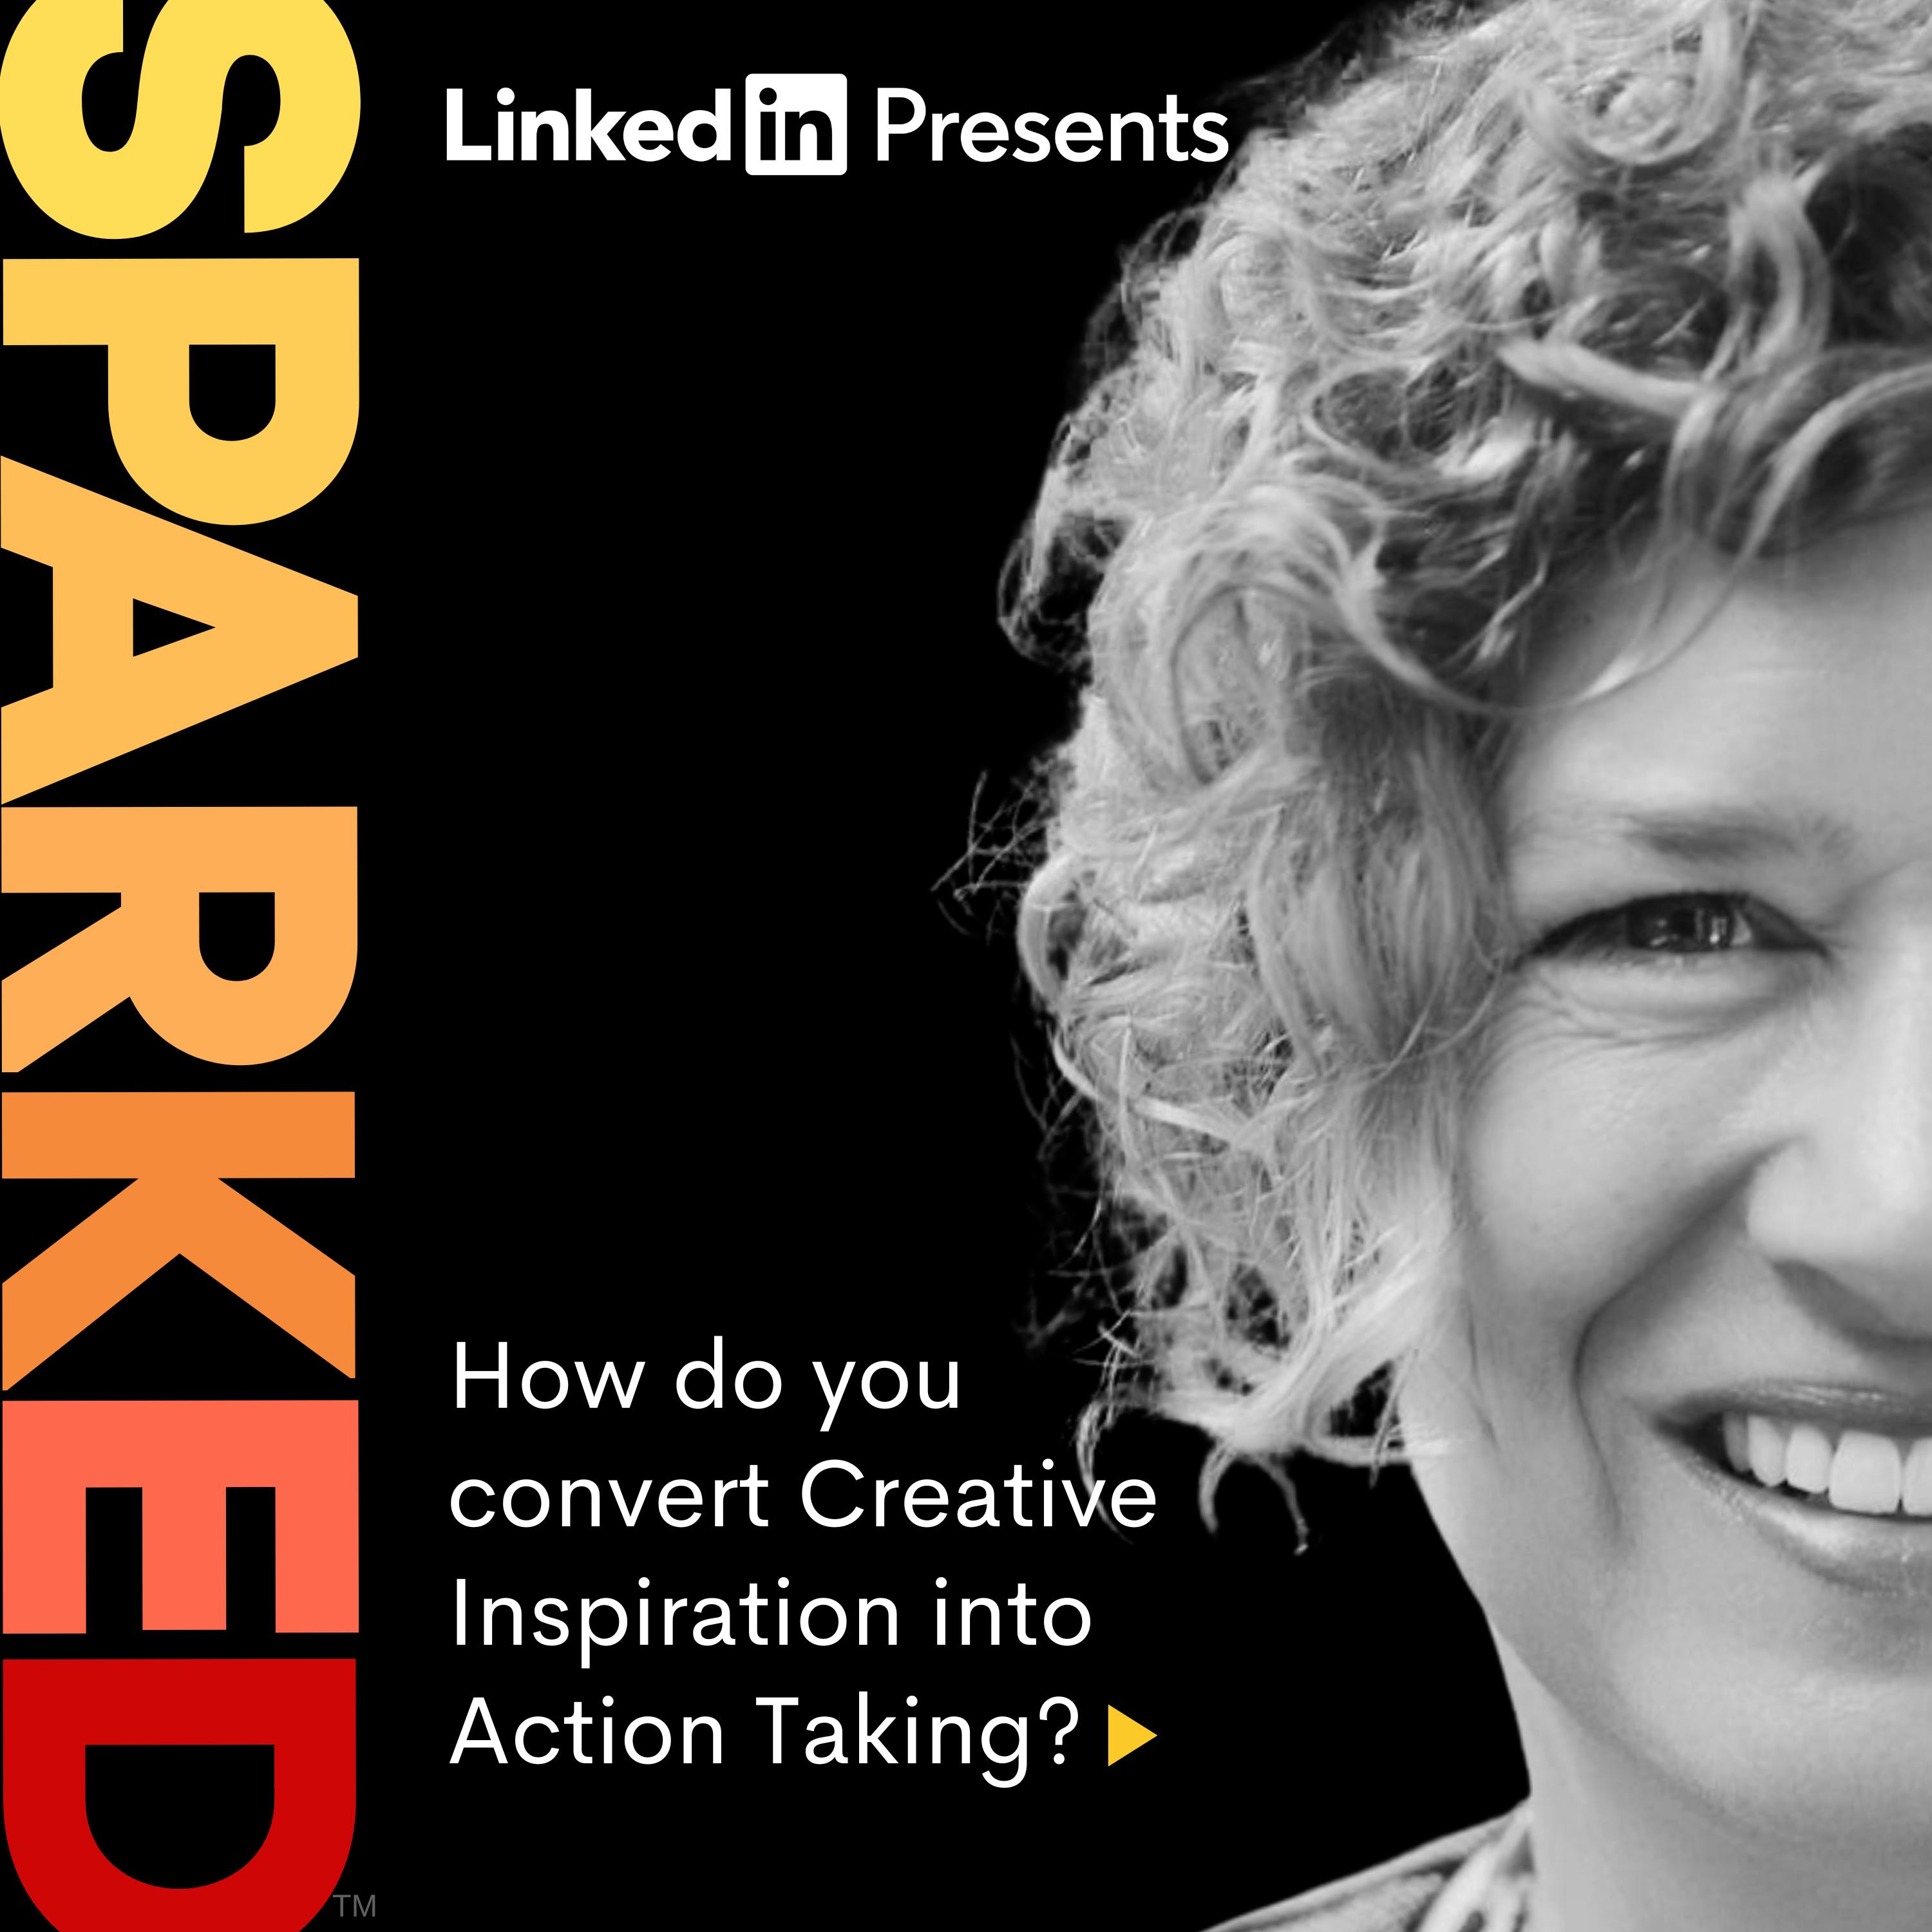 How to convert Creative Inspiration into Action Taking with Cynthia Morris